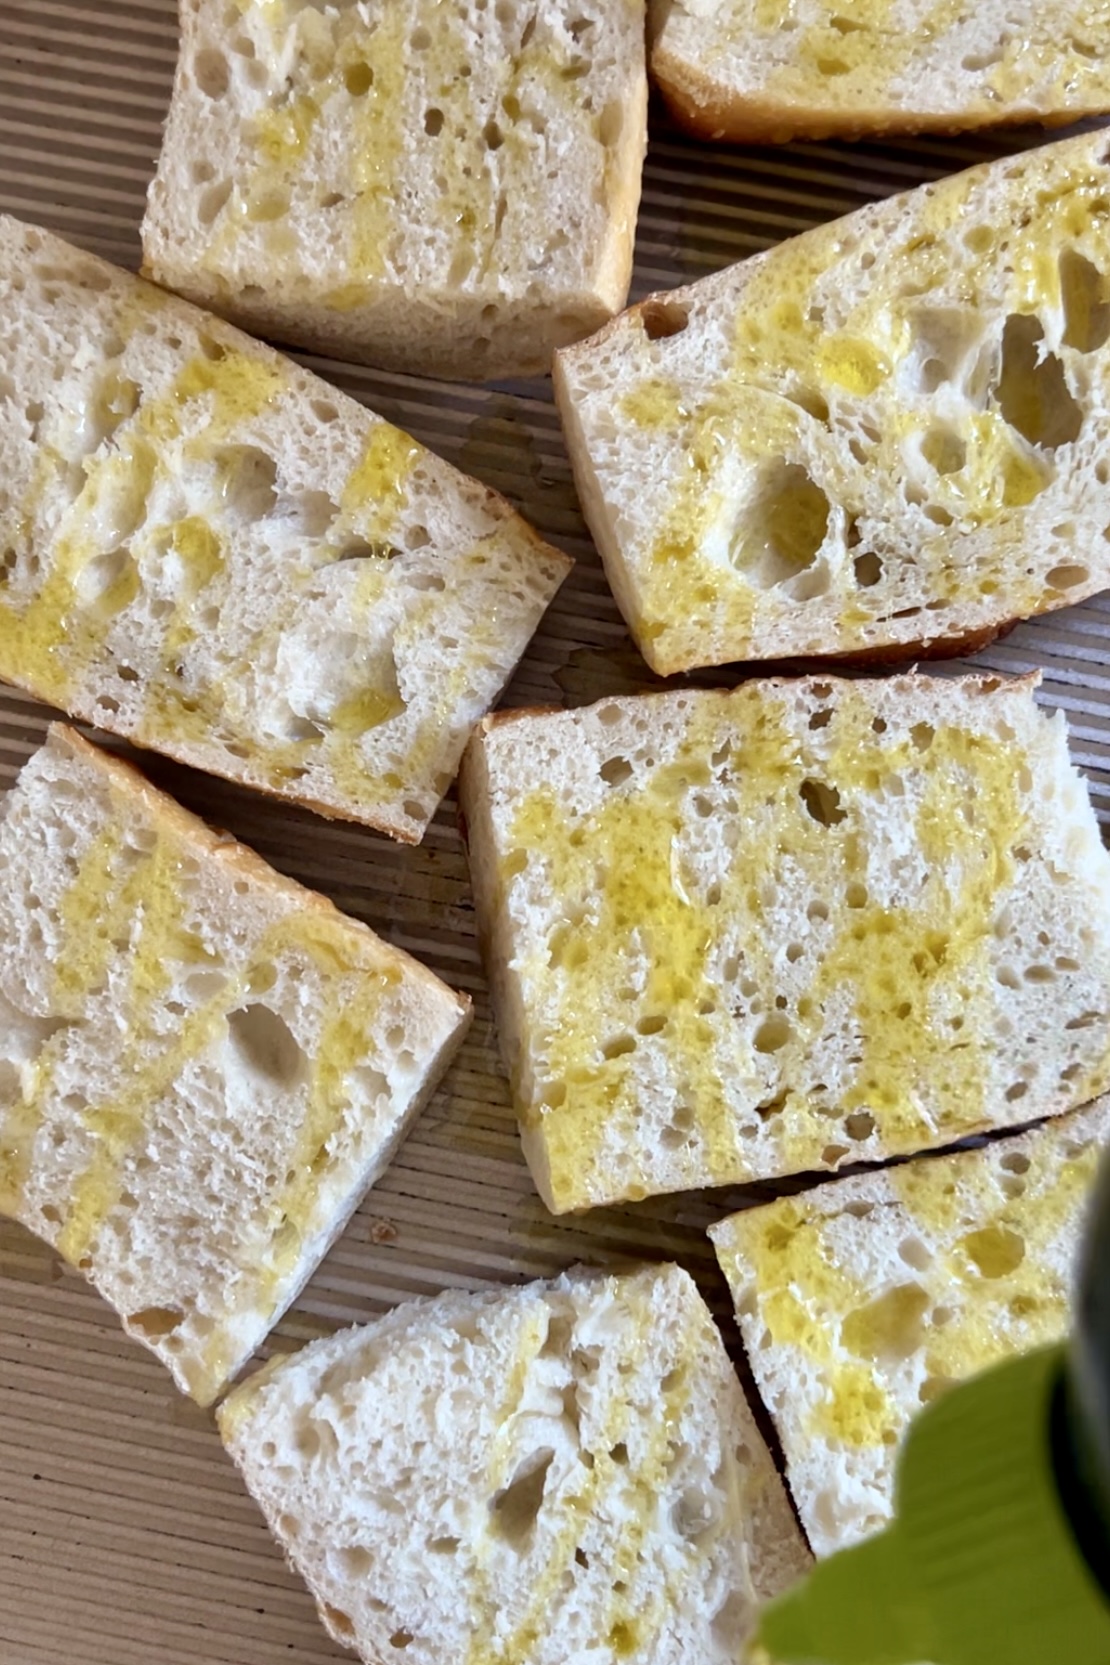 A close-up of several slices of ciabatta bread on a wooden surface, perfect for Pan Con Tomate. The bread is lightly drizzled with olive oil, giving it a yellowish tint and enhancing its porous and airy texture. The irregular holes and the soft, rustic appearance are characteristic of ciabatta.